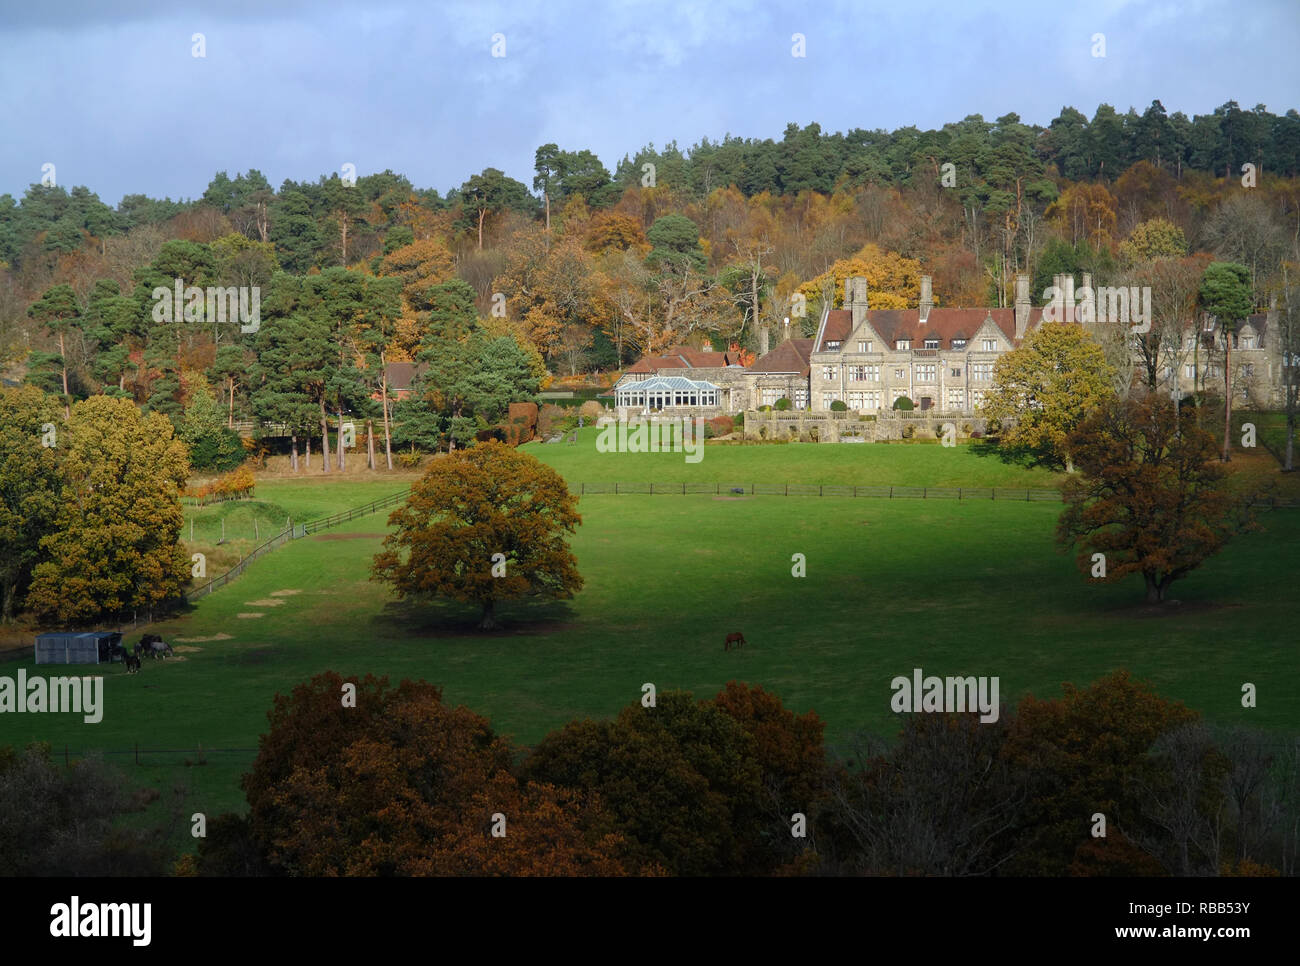 Old Lodge, Hartfield, East Sussex, UK. The Jacobean style former home of Earl De La Warr in the Ashdown Forest. Stock Photo